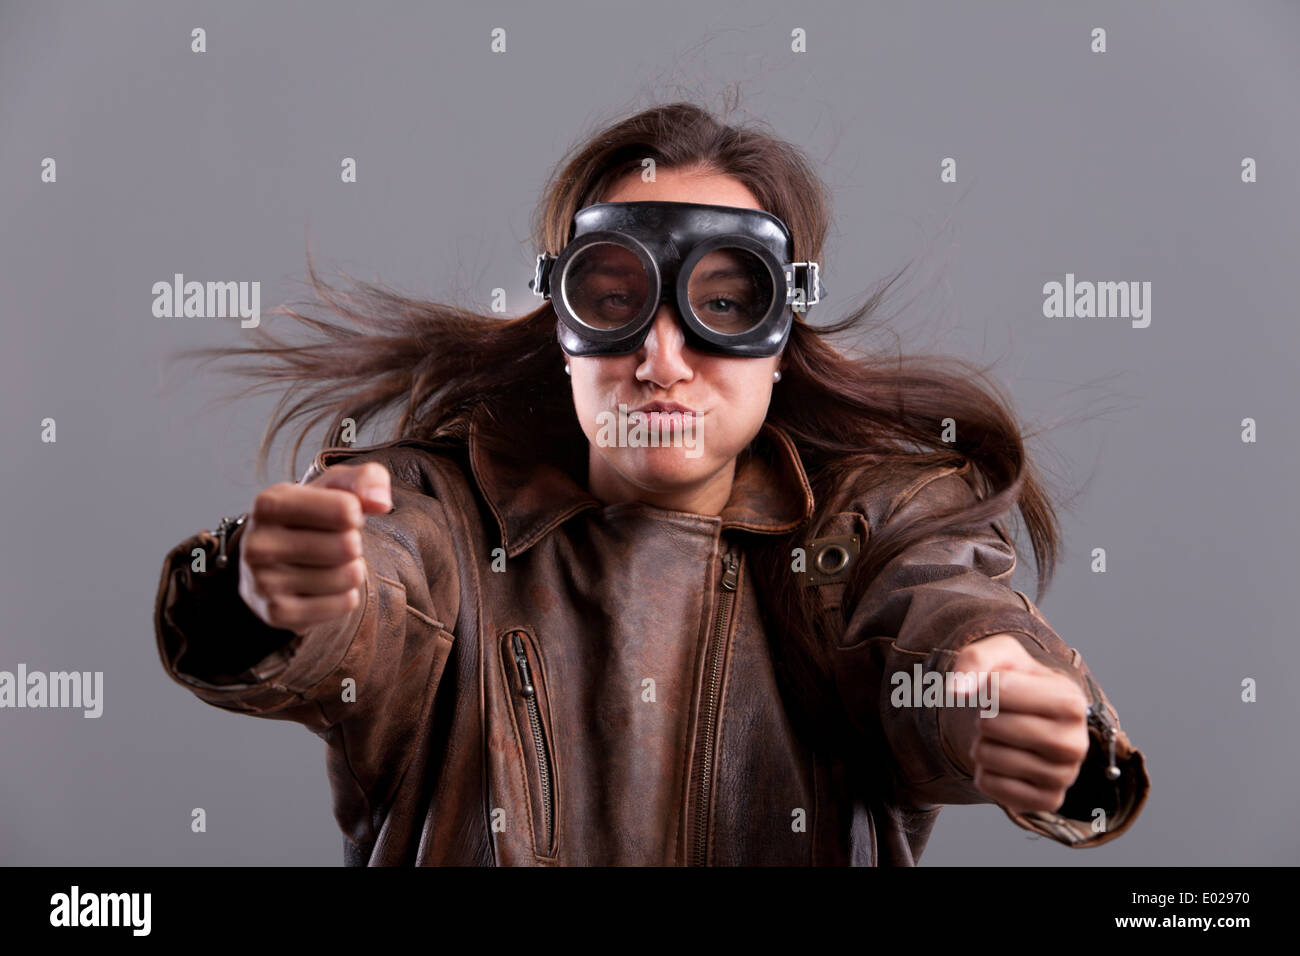 Funny girl with motorbiker big glasses and a leather jacket pretending to blow Stock Photo